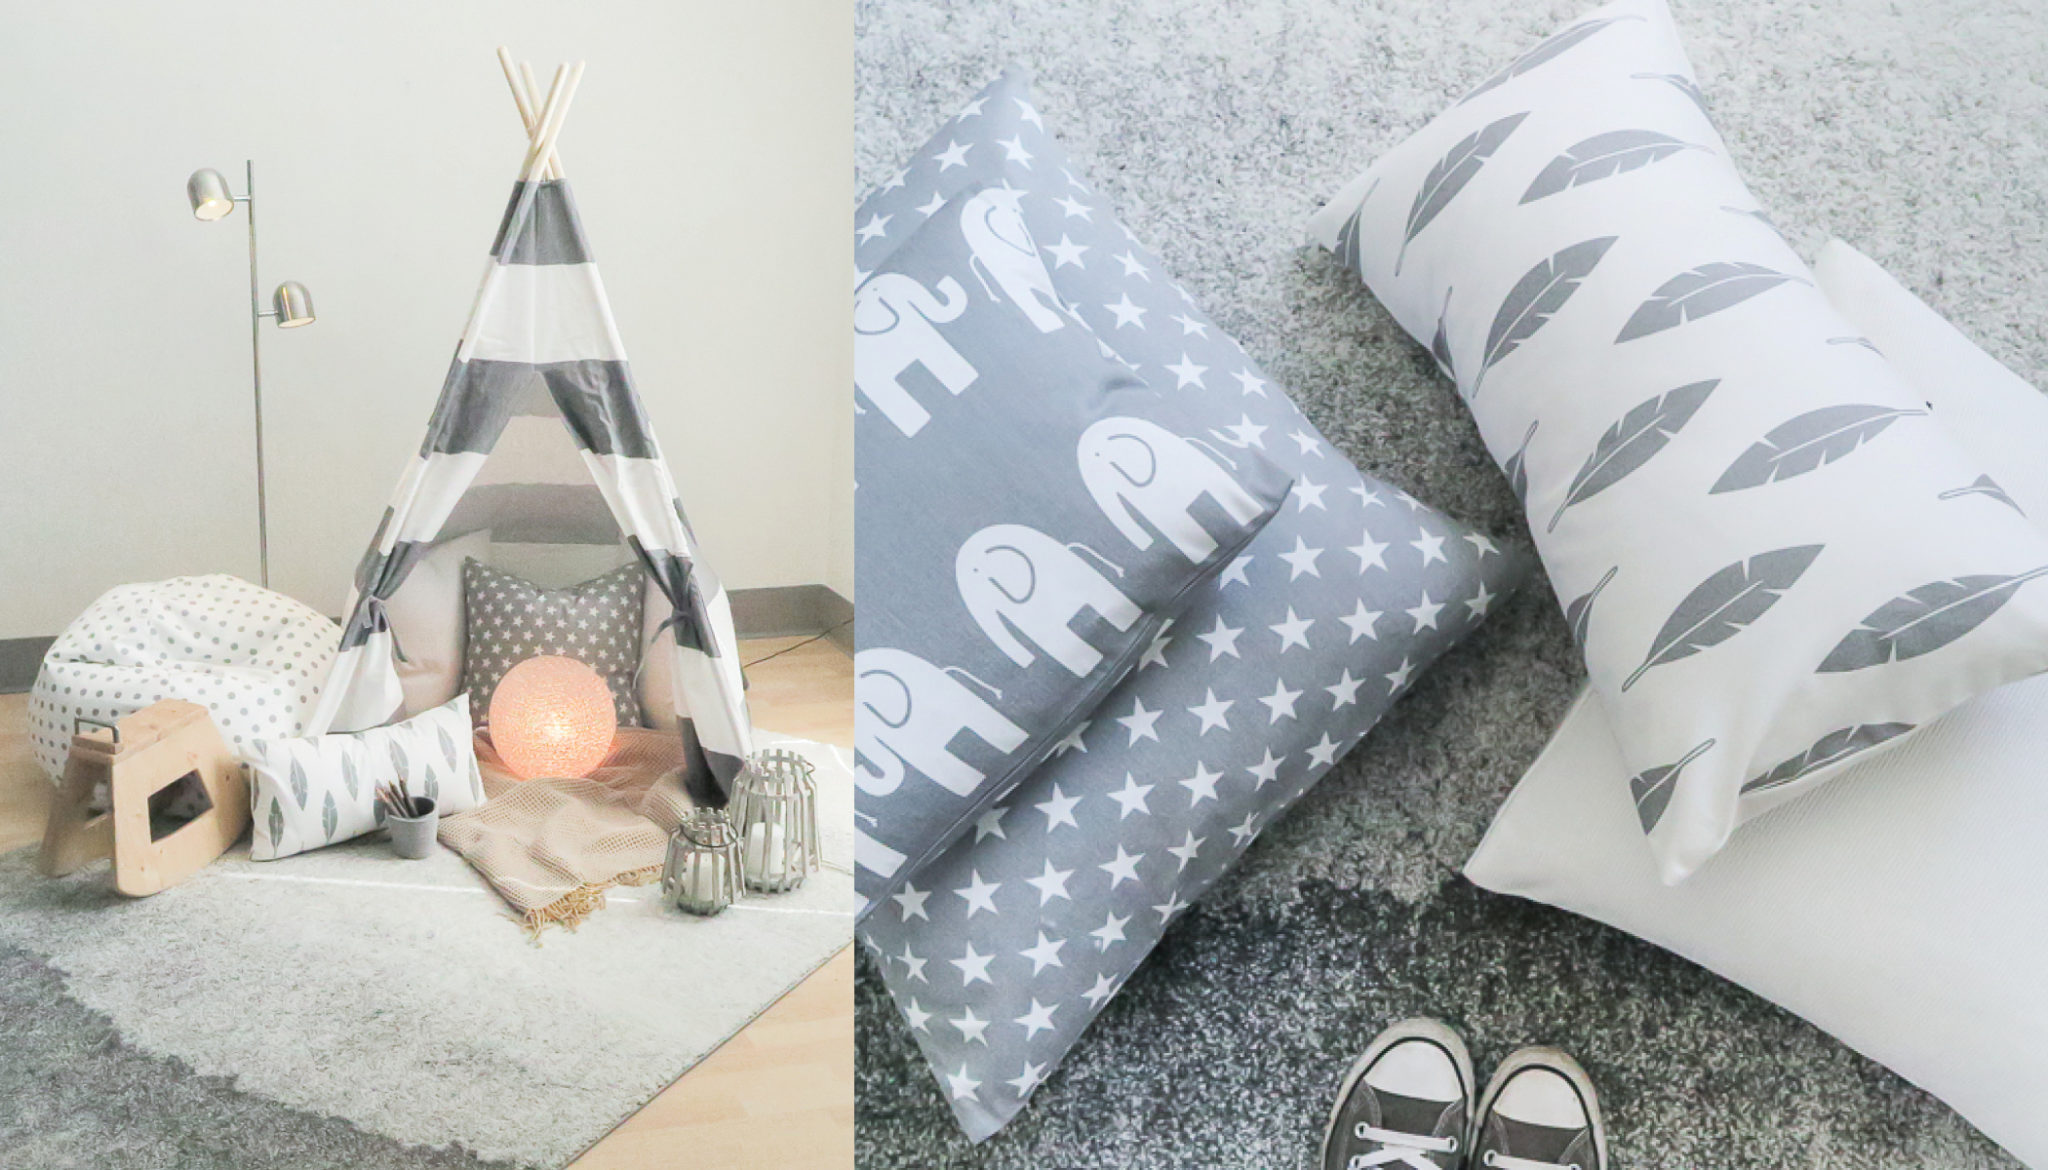 kids tee-pee and bean bag chair in gray and white stripes and polka dots